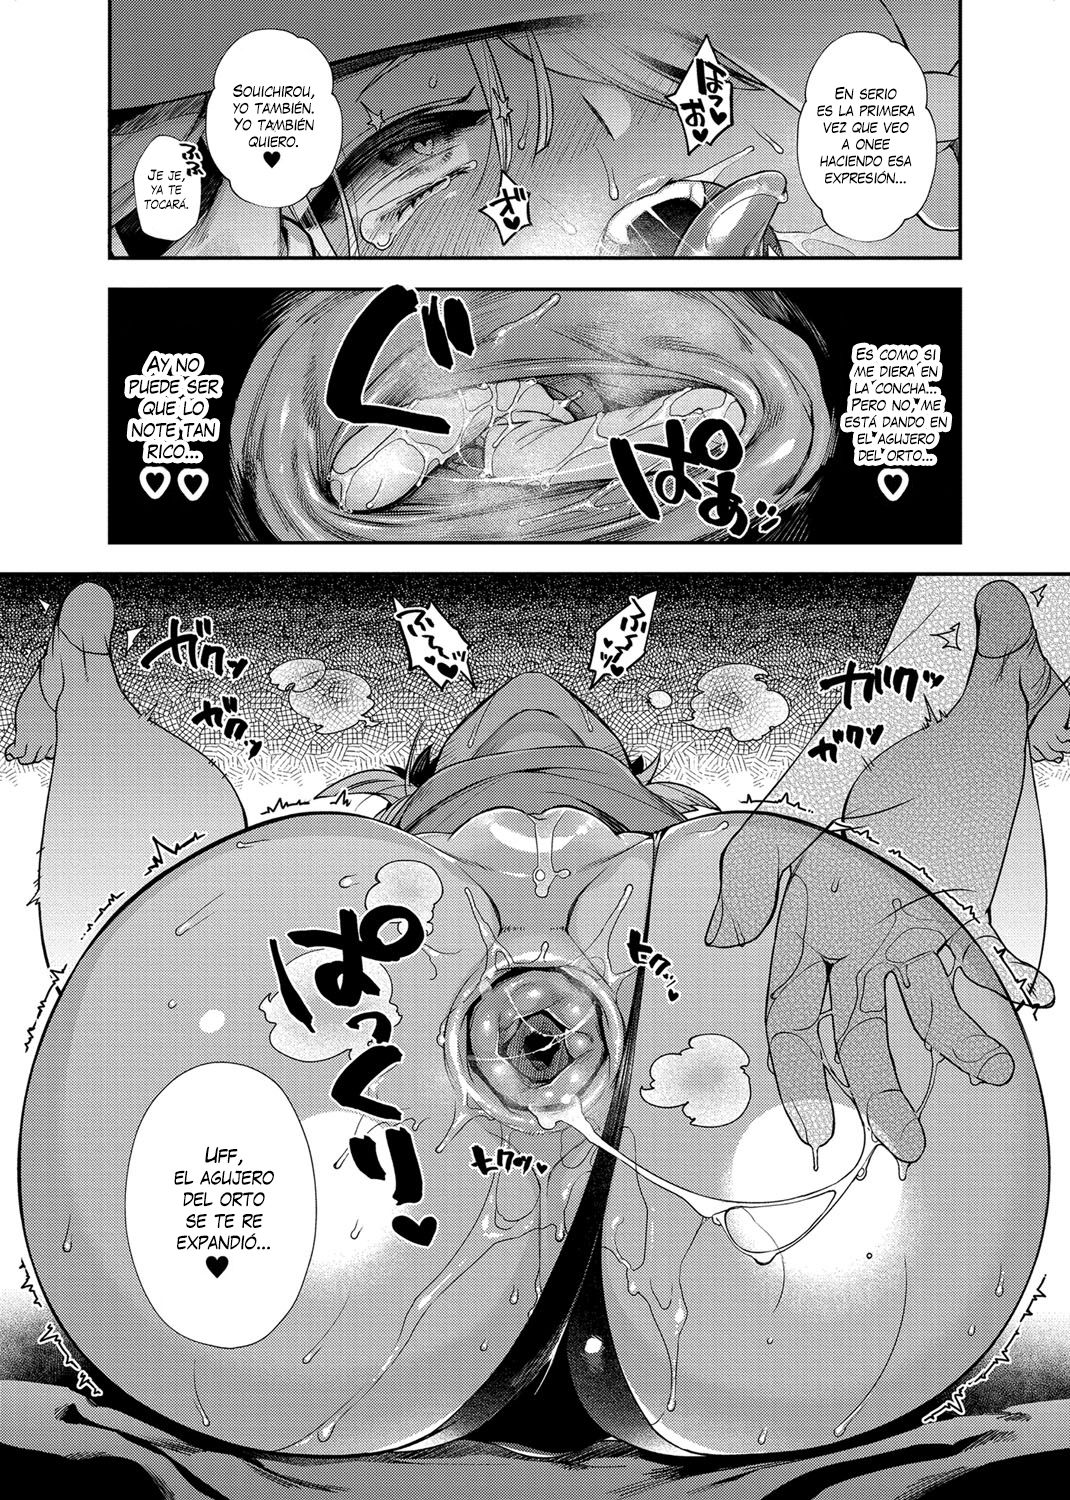 MATING WITH ONI PART 5 - 12